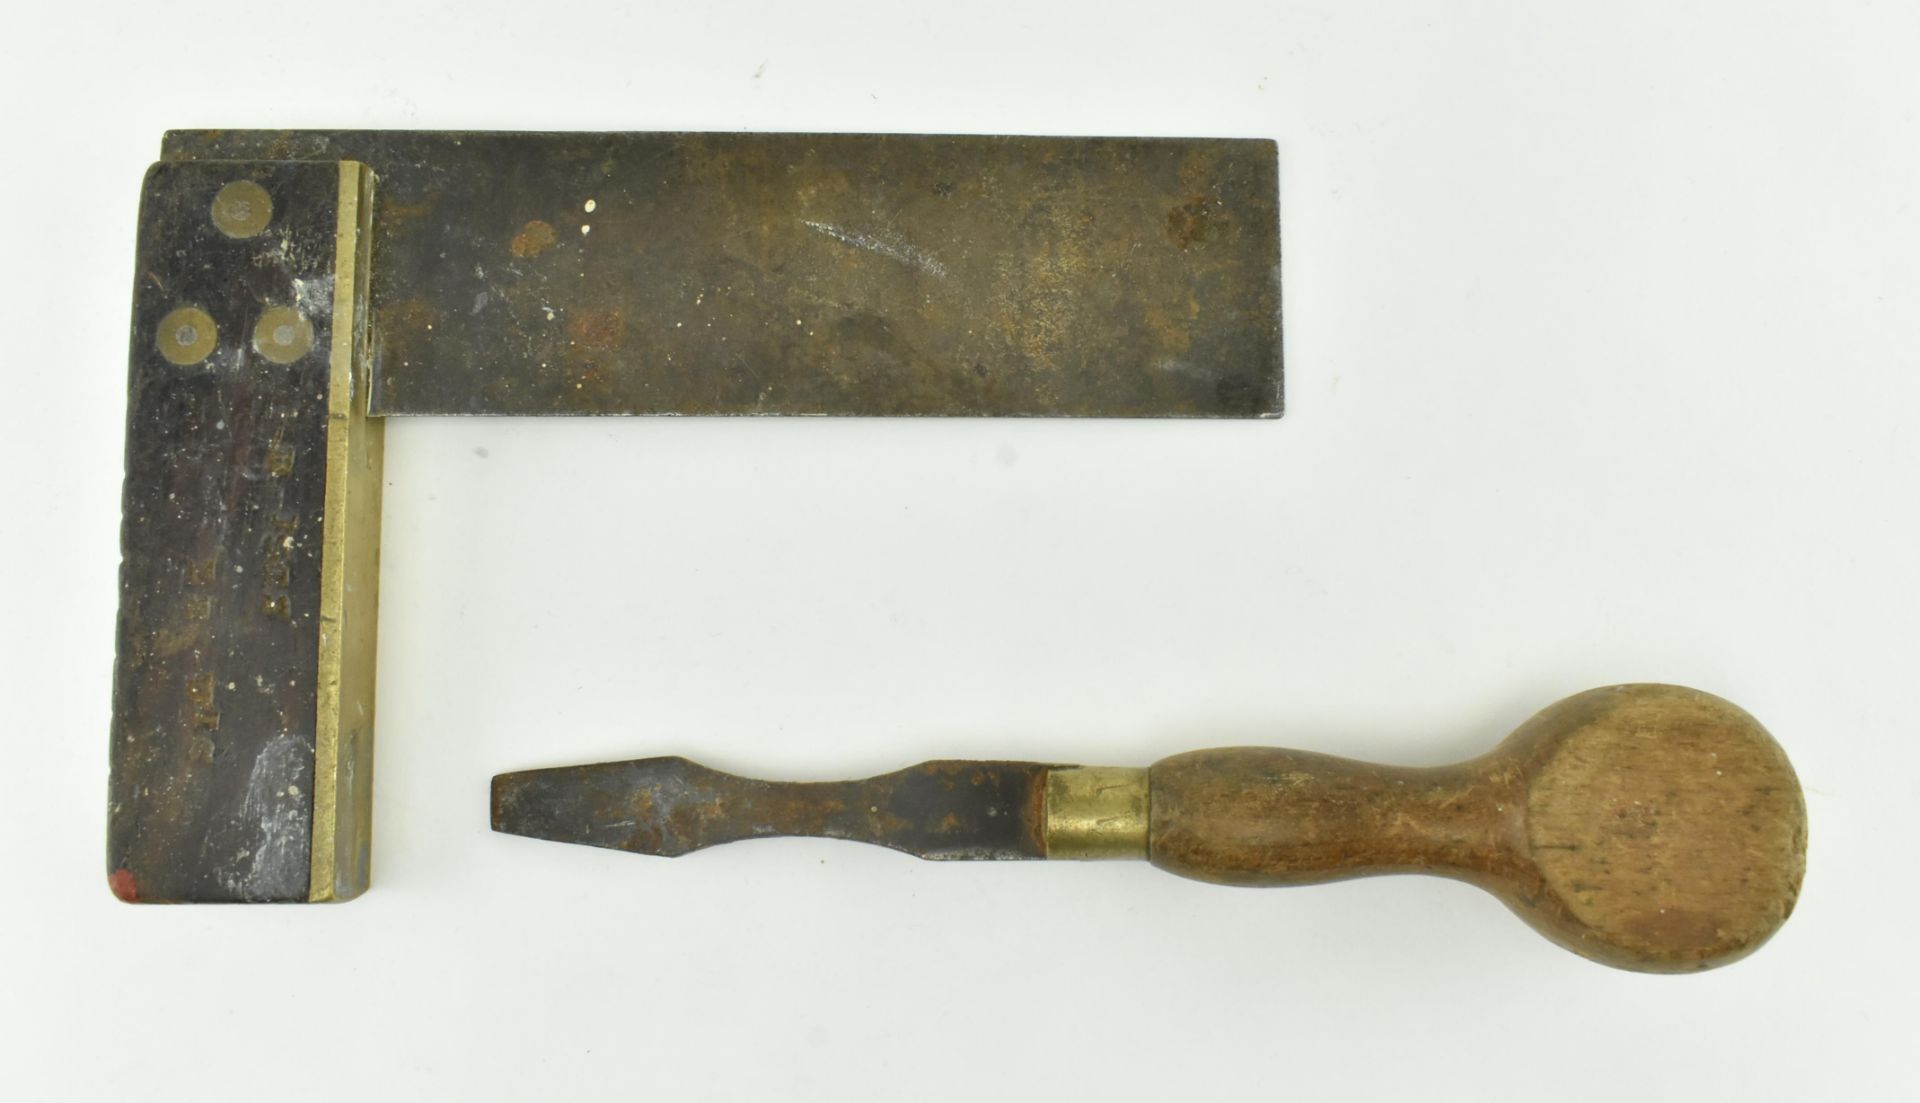 VICTORIAN THOS. IBBOTSON SCREWDRIVER & TRY SQUARE